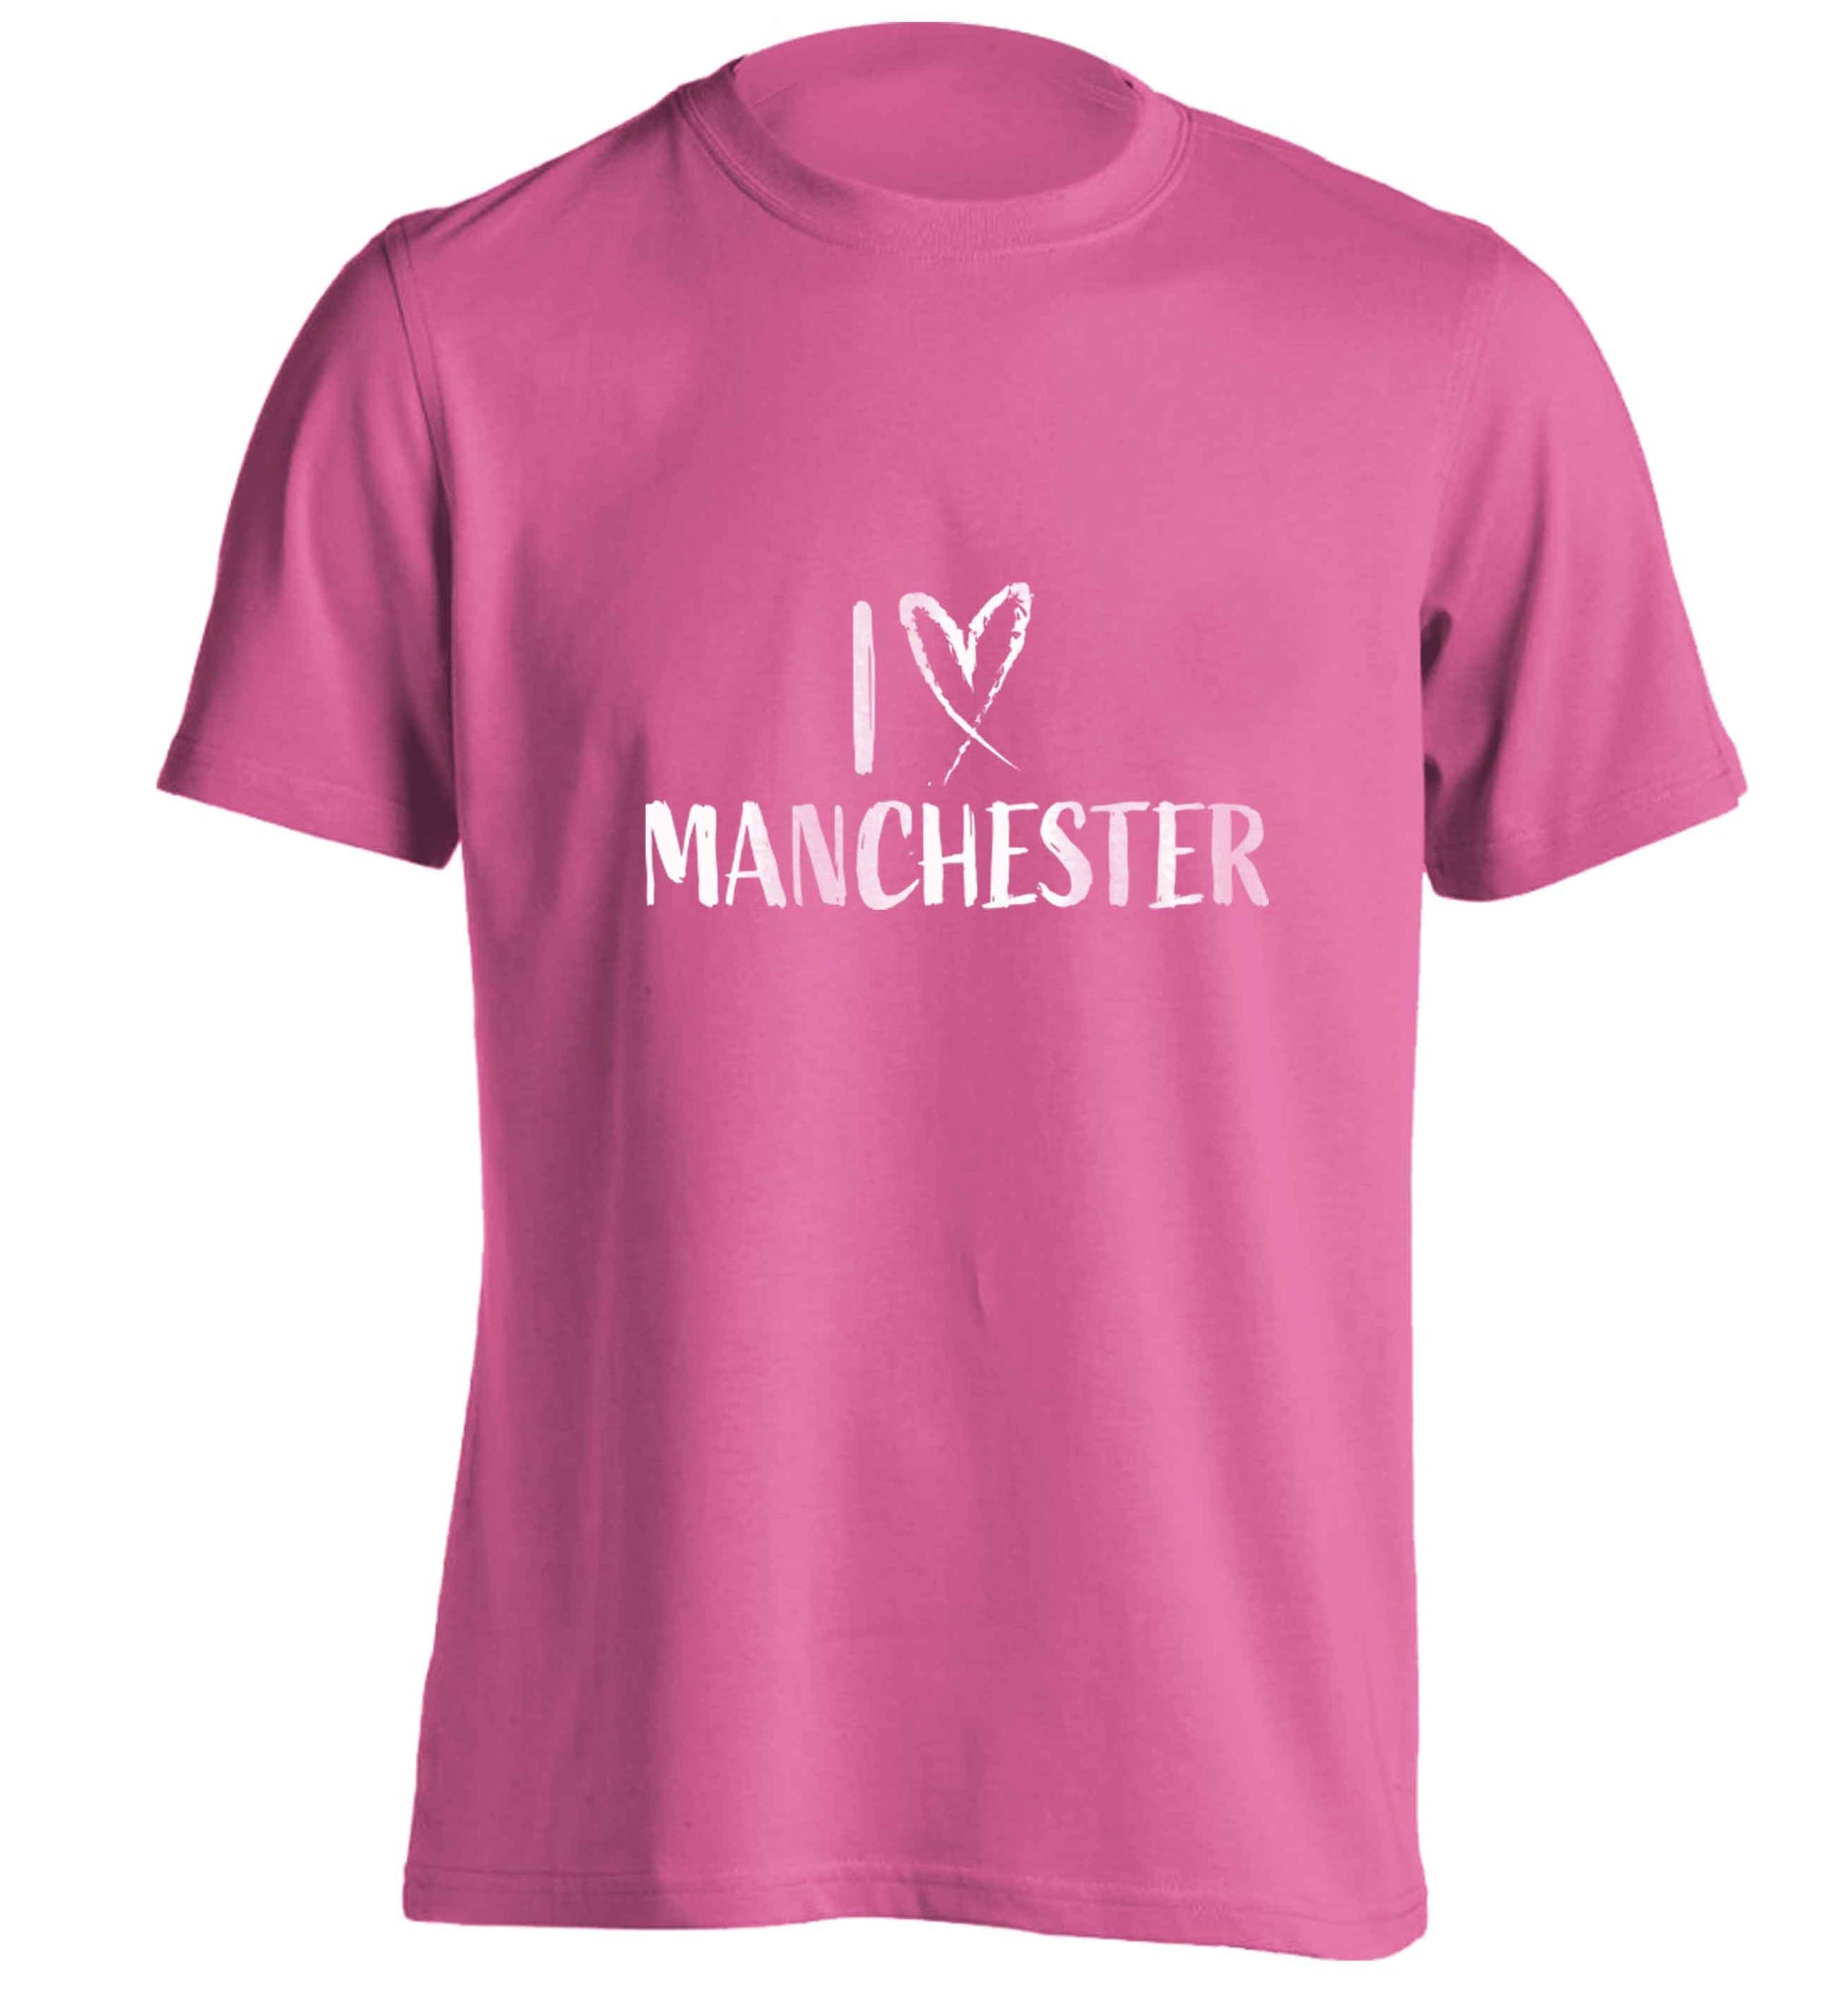 I love Manchester adults unisex pink Tshirt 2XL